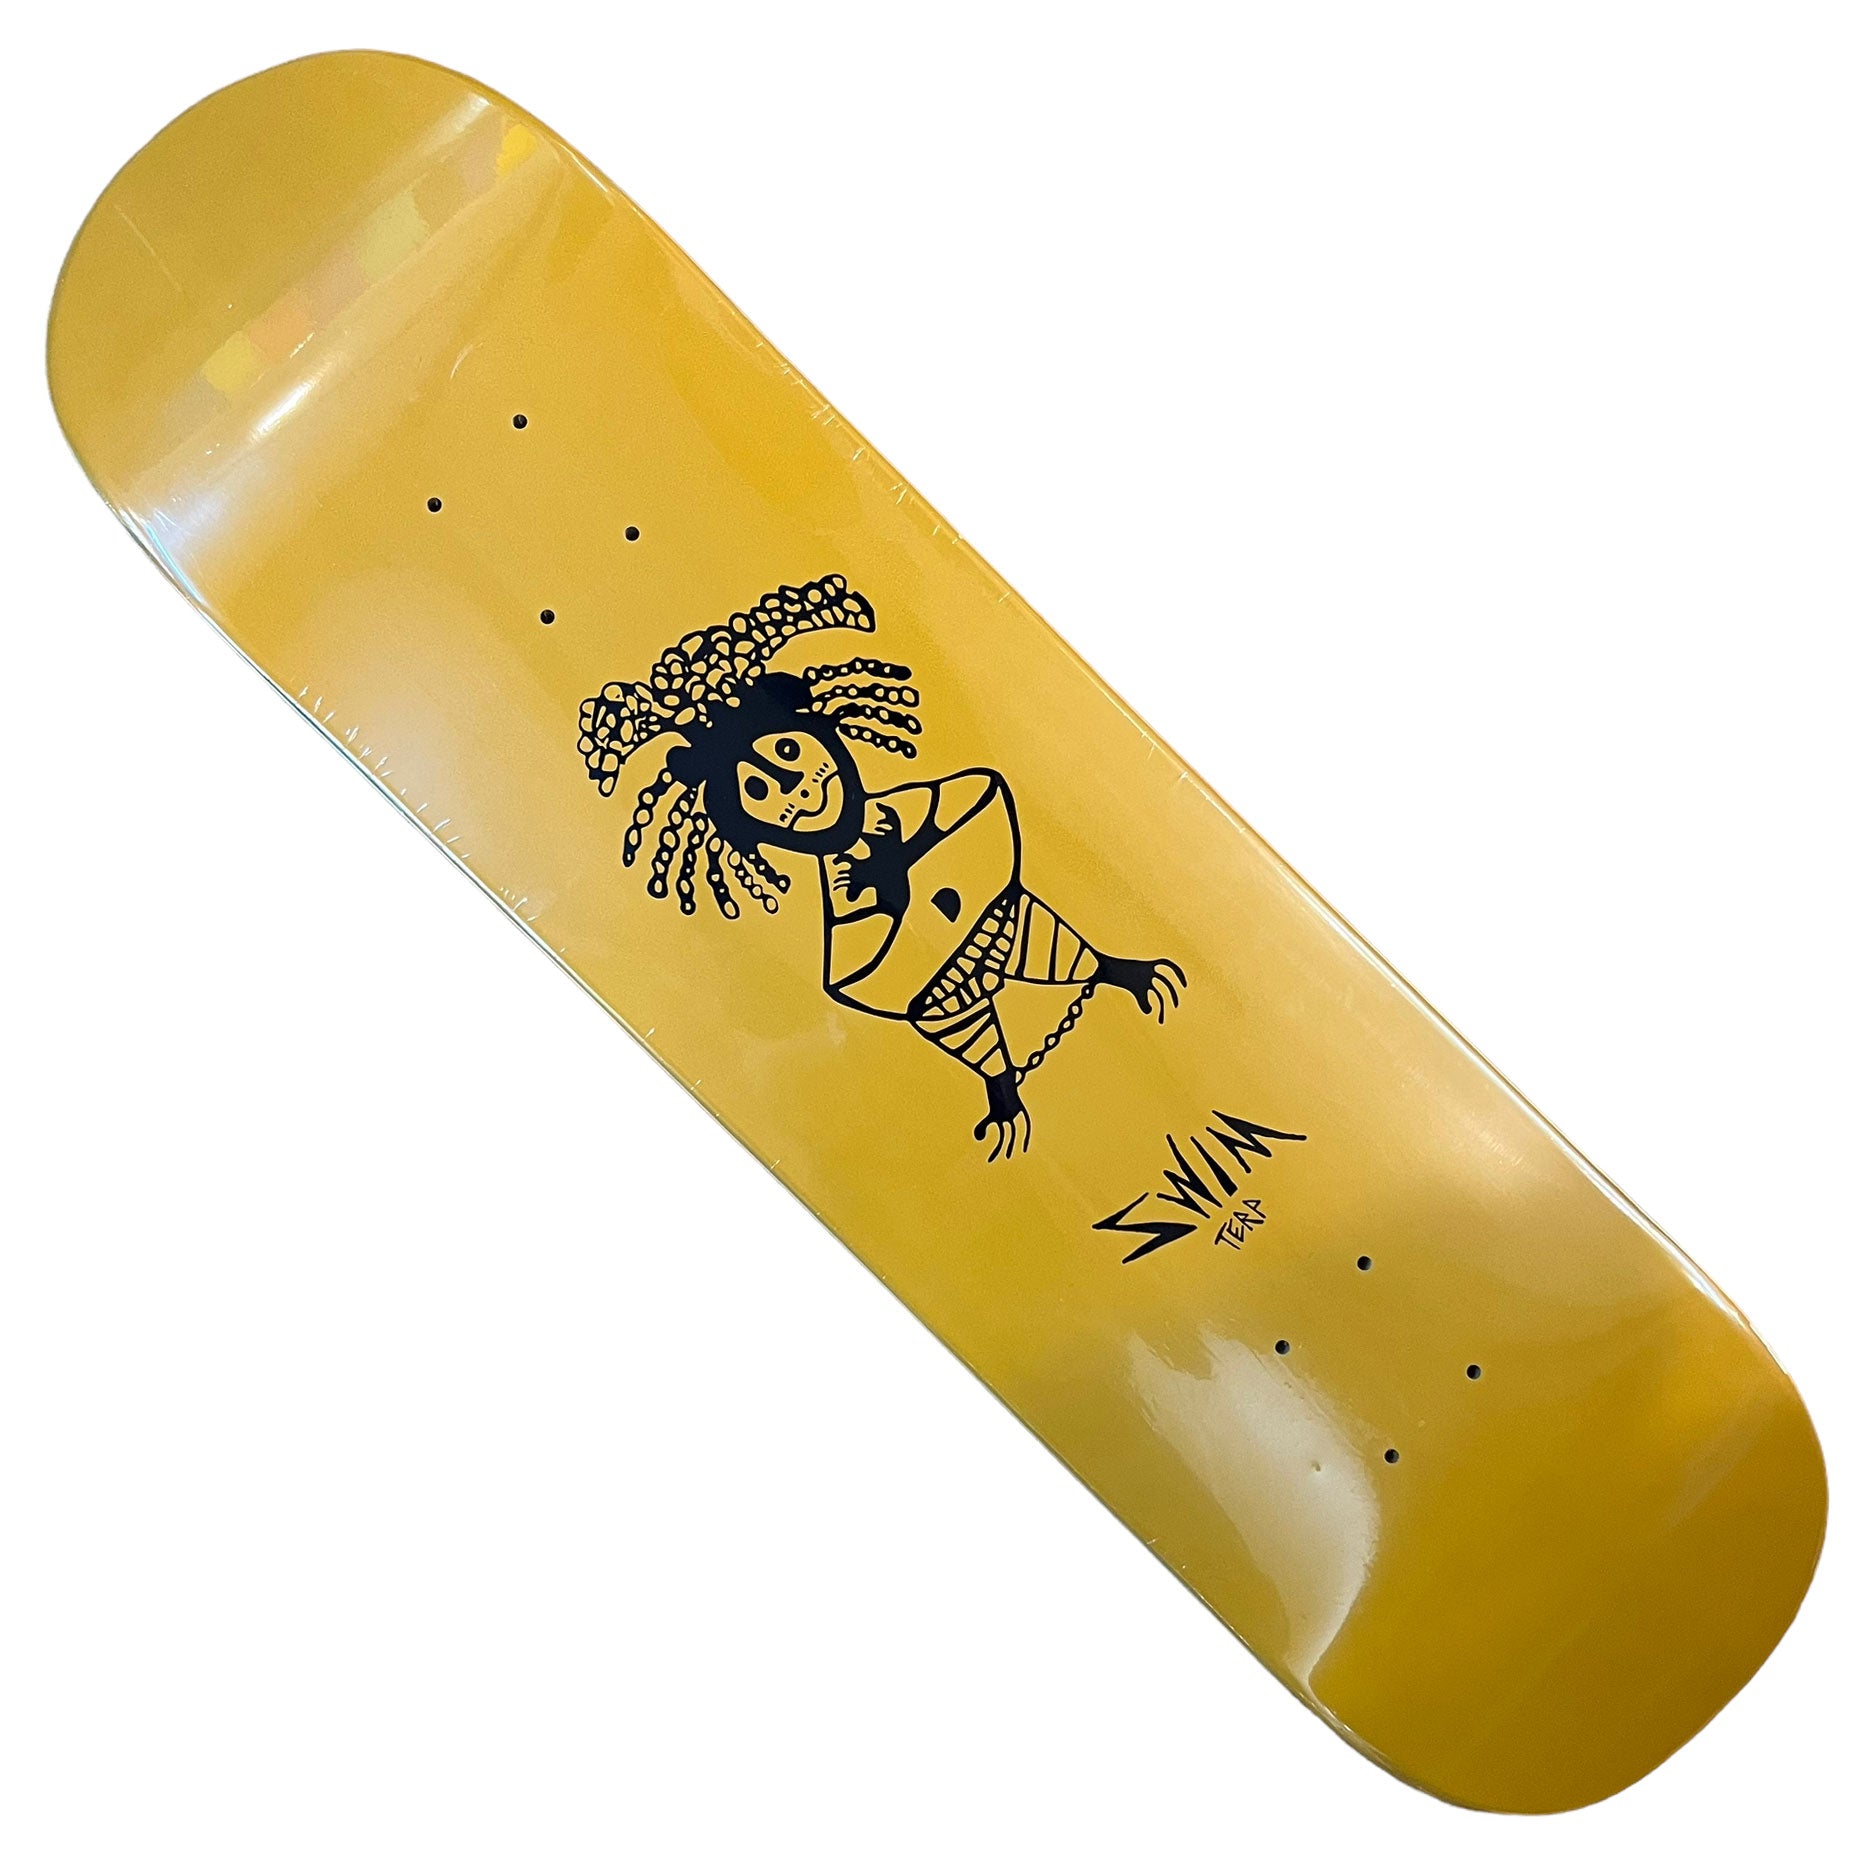 Swim Deck Kevin Terpening Fat Bottom 8.5x32.4 Shaped Square Tail